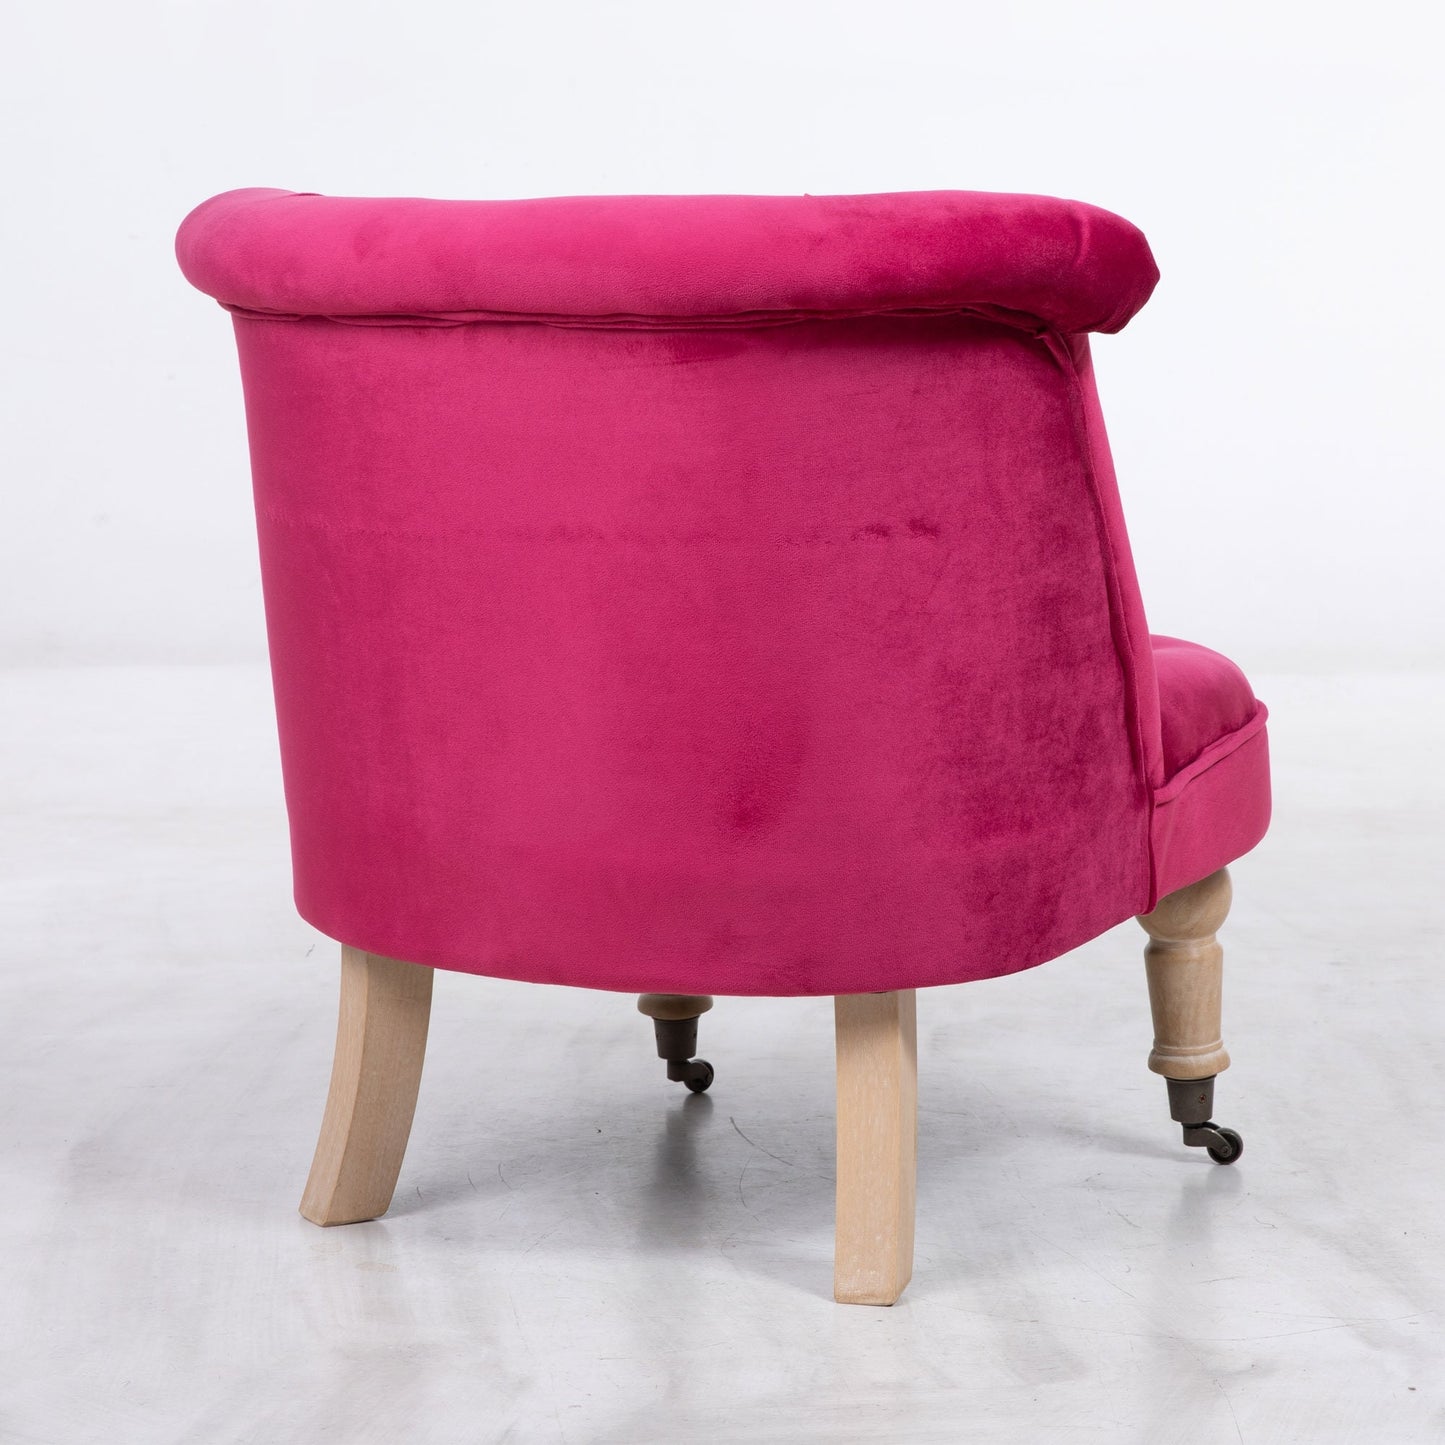 Raspberry Pink Cocktail Chair With Oak Legs